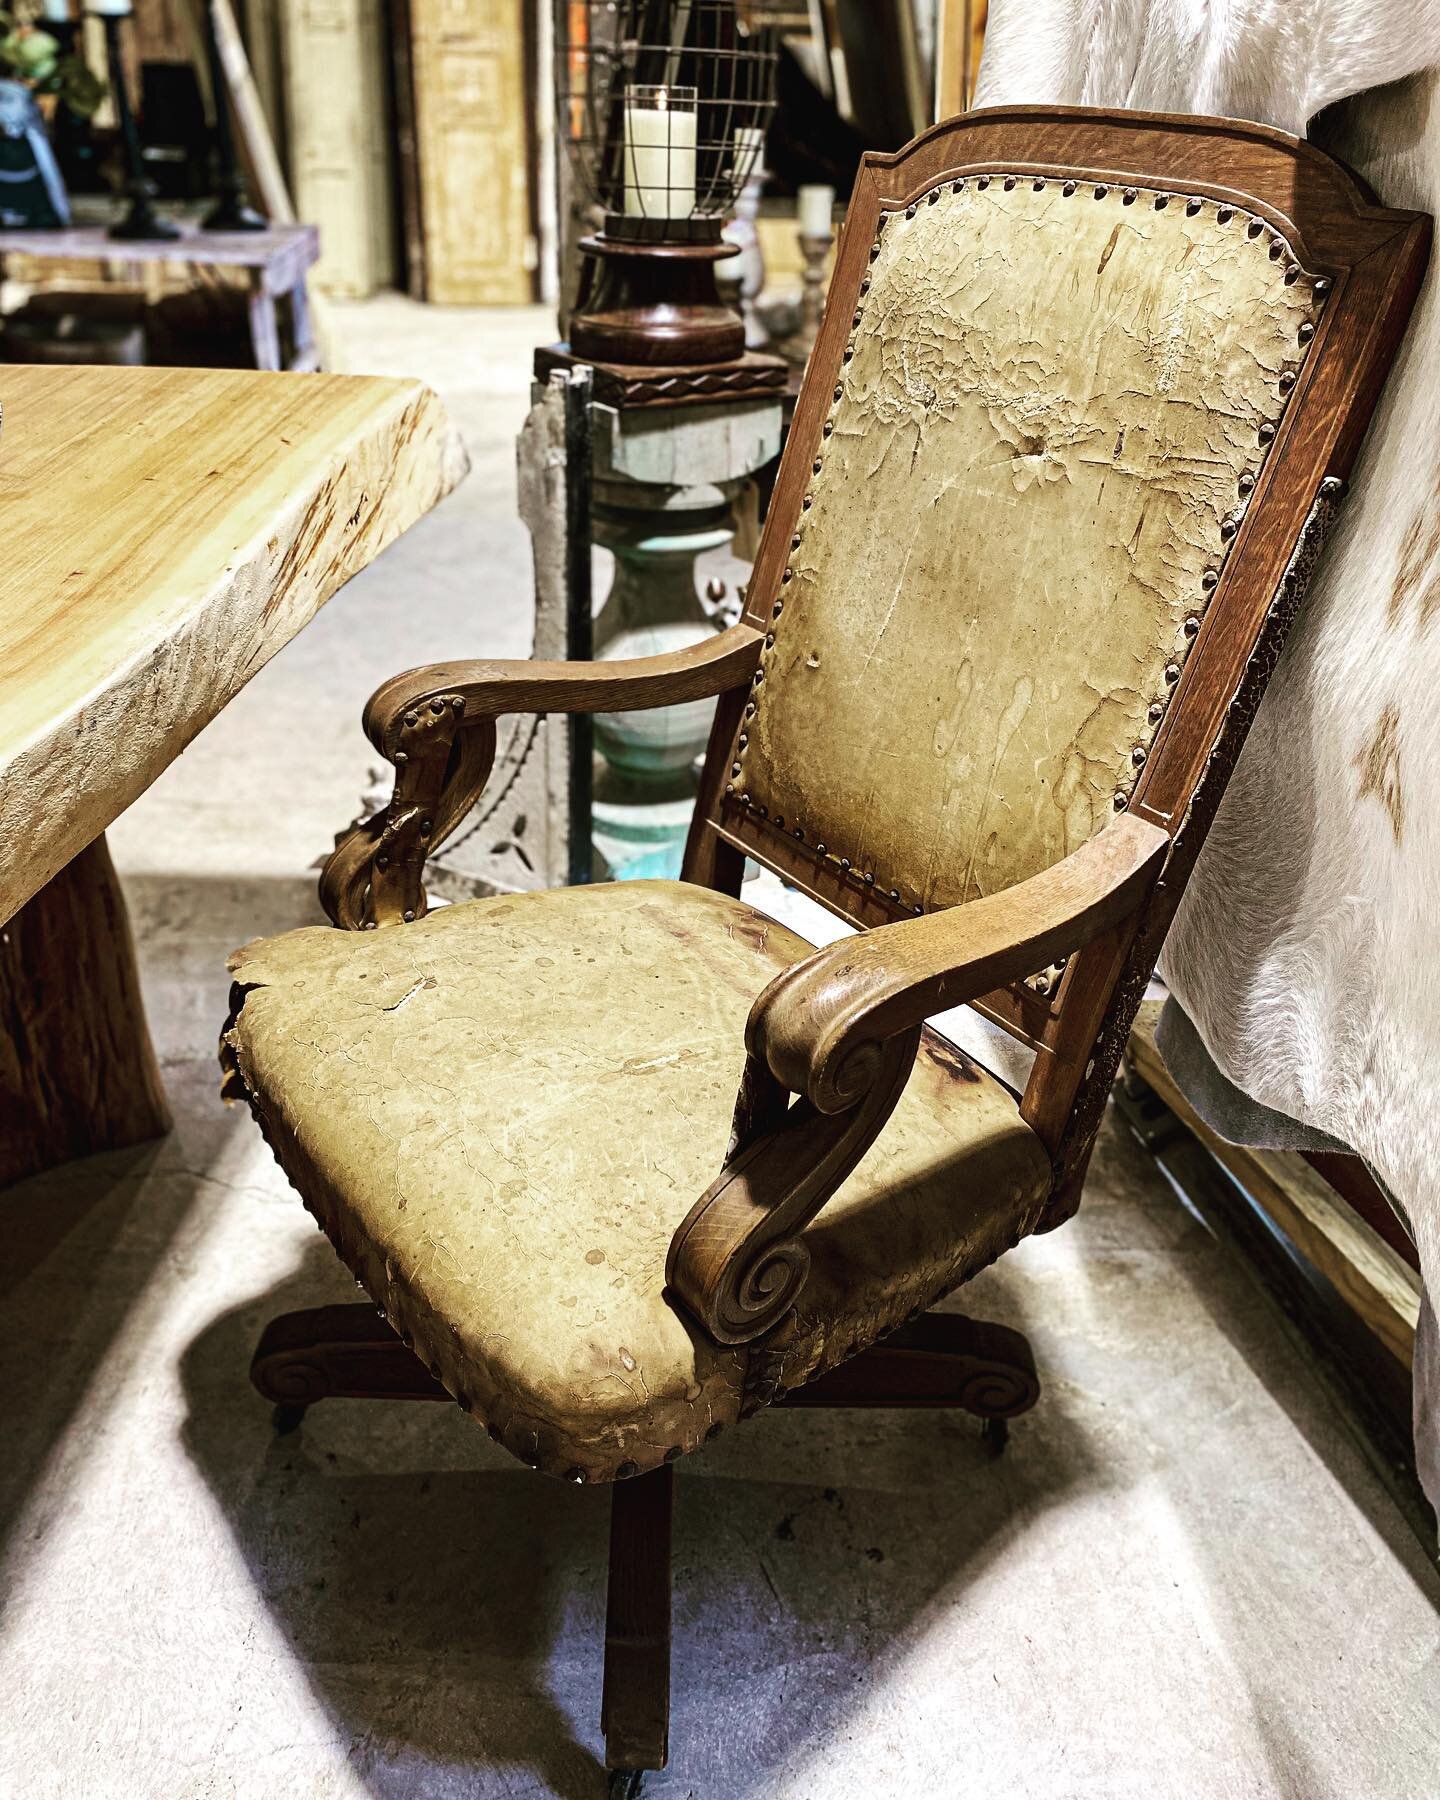 This vintage chair came from an early 1900&rsquo;s farmhouse &mdash; here is what the prior owner shard with us about that property: 

German immigrants migrated to this property earlier on&hellip; in the 1800&rsquo;s by the Blanco River but this was